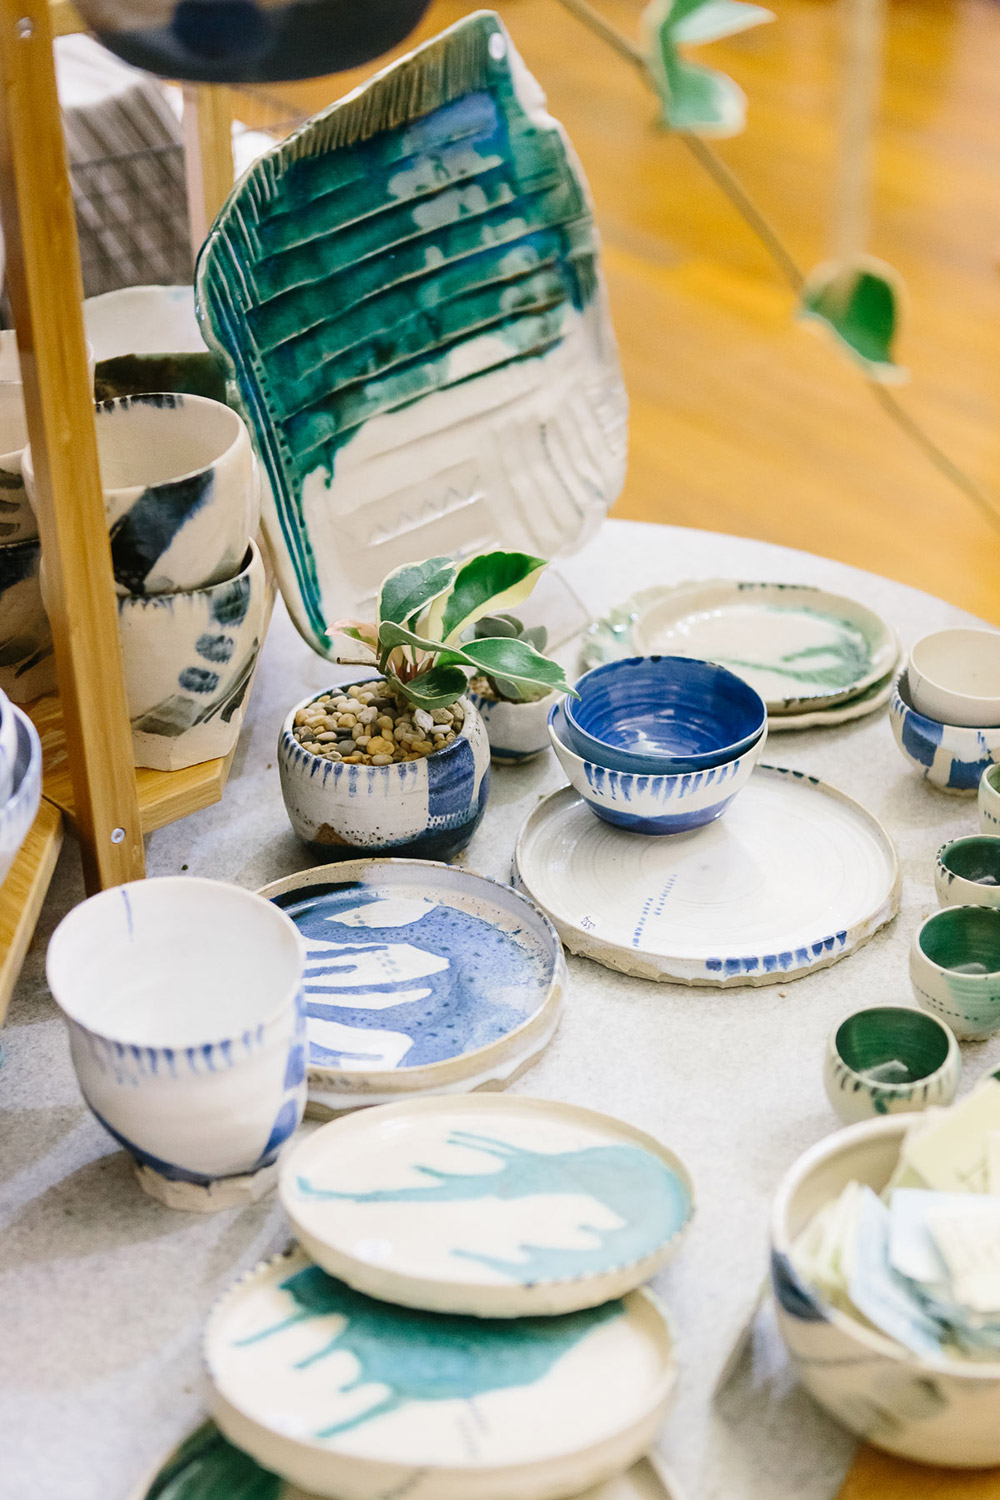 Beautiful handmade ceramic pieces on display by Brush and Wheel